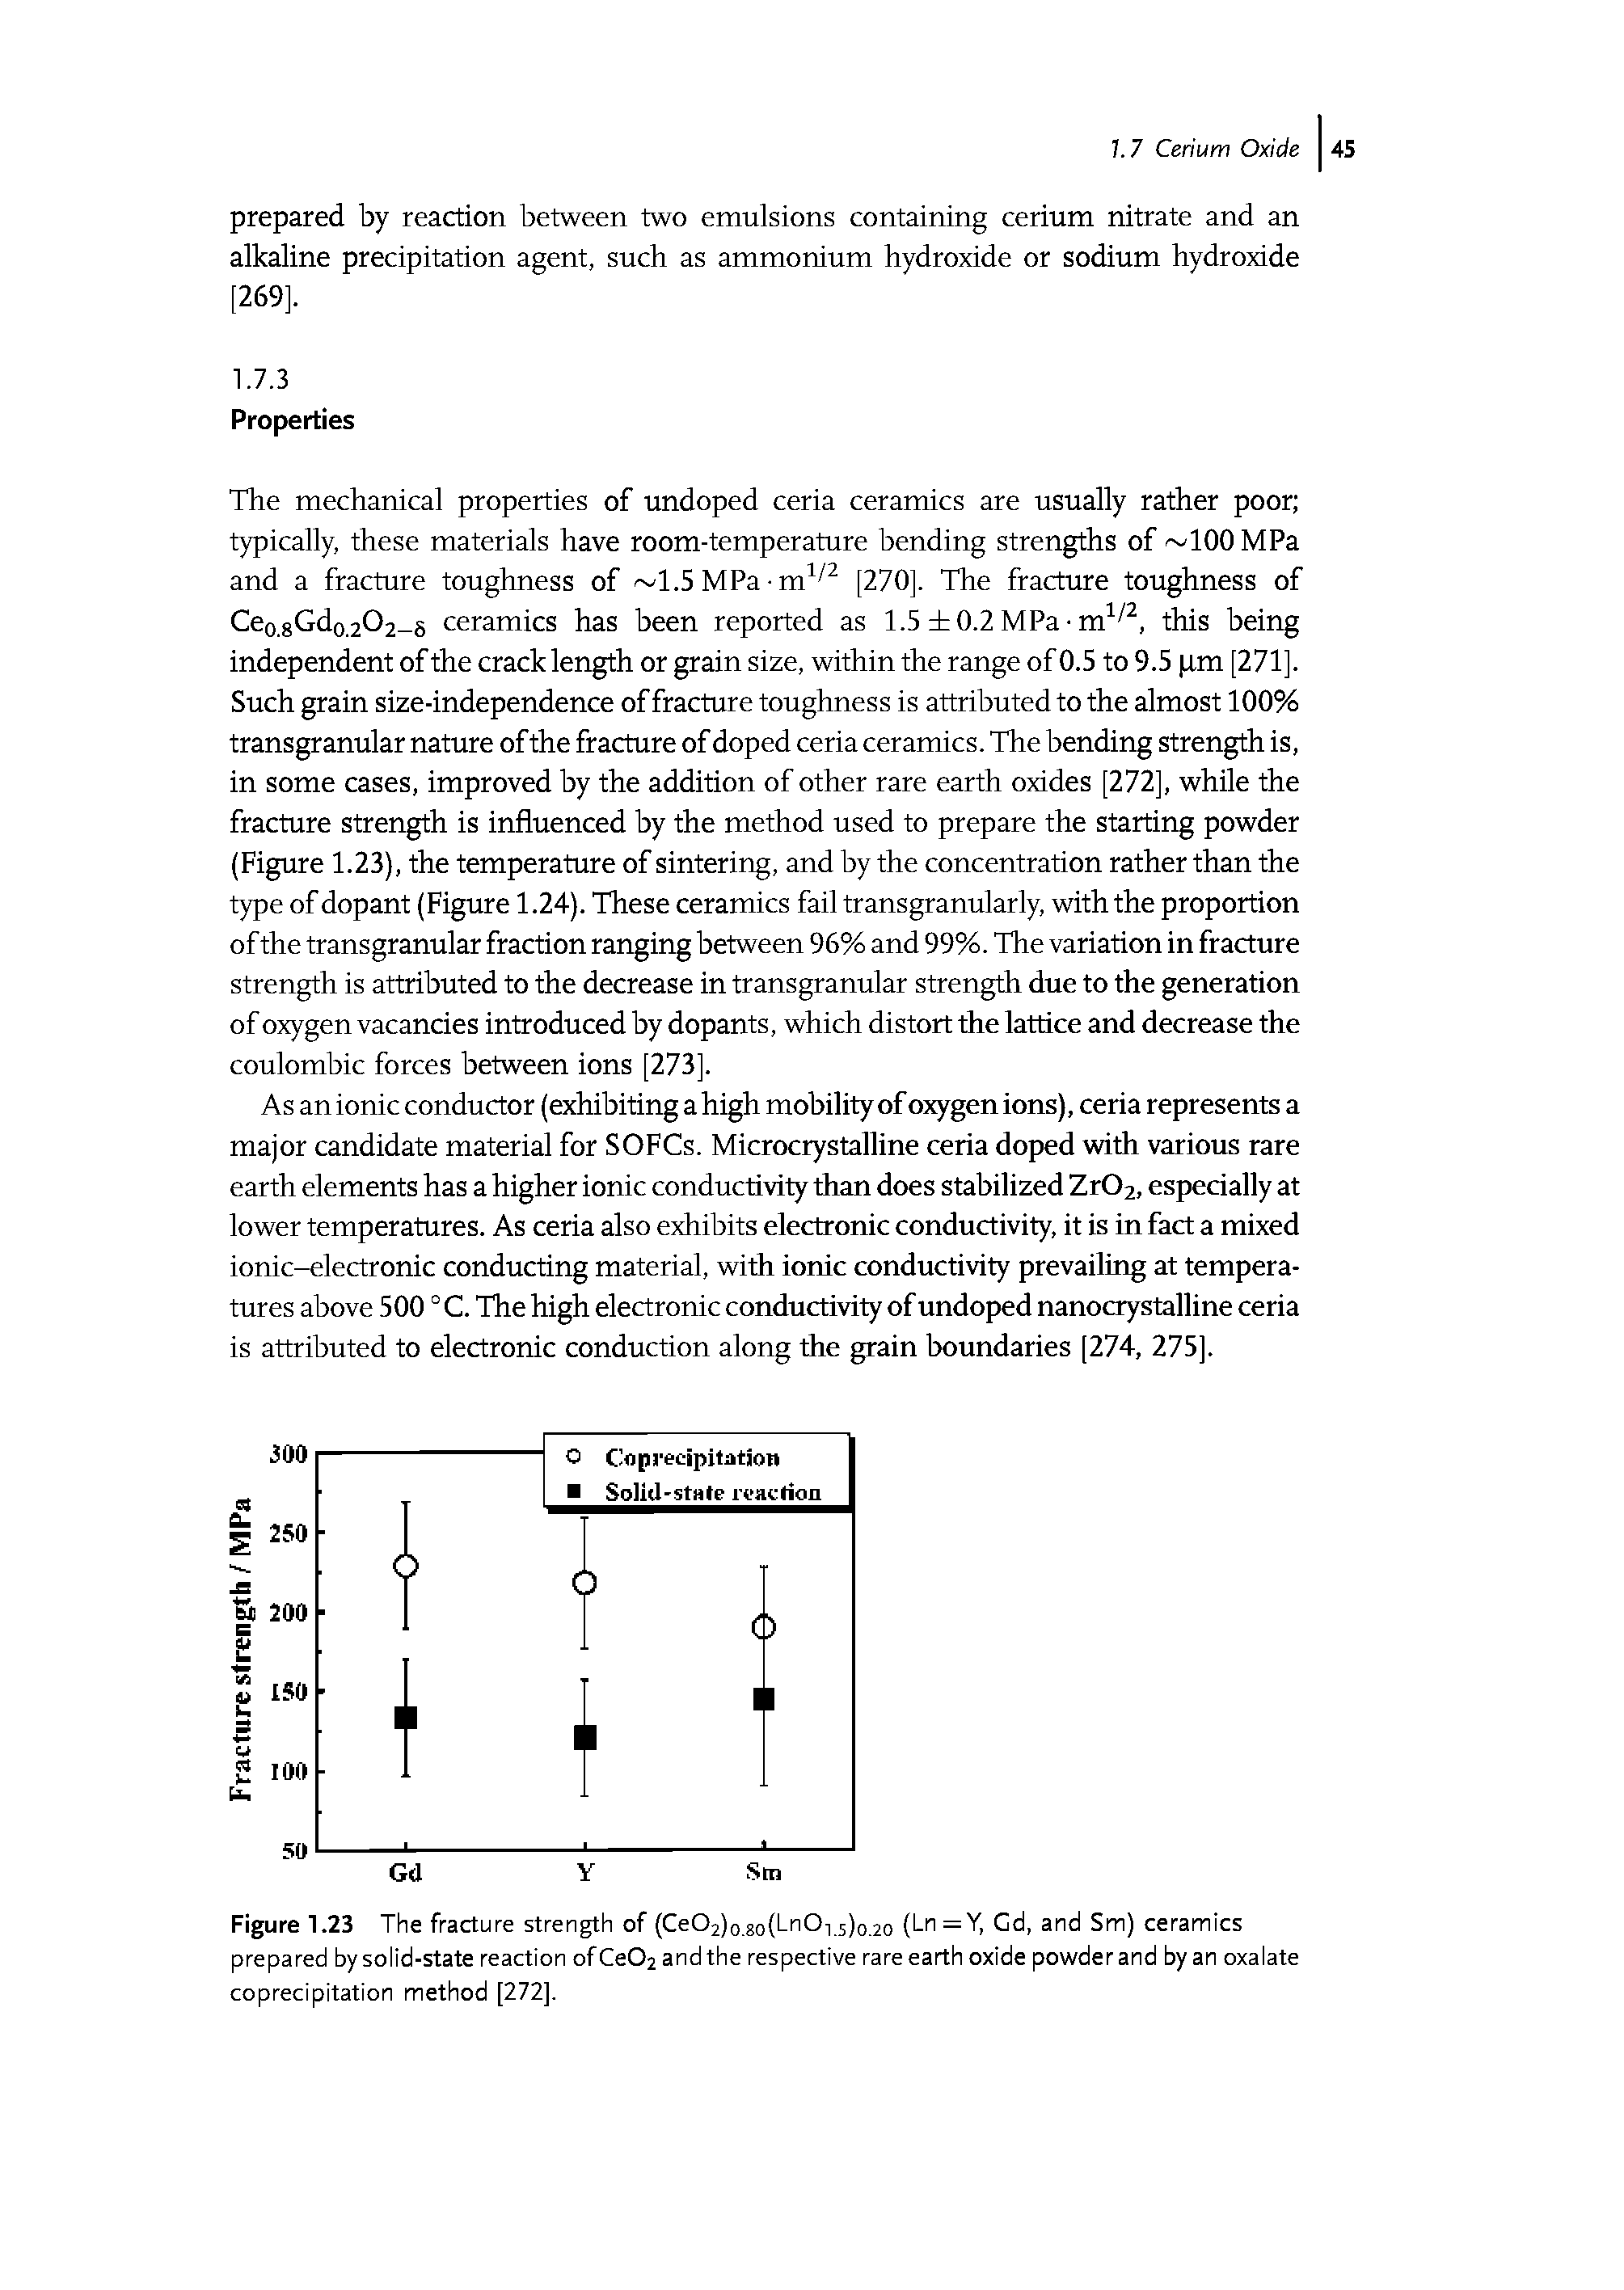 Figure 1.23 The fracture strength of Ce02)o.go LnOi 5)0.20 (Ln=Y, Cd, and Sm) ceramics prepared by solid-state reaction ofCe02 and the respective rare earth oxide powder and by an oxalate coprecipitation method [272],...